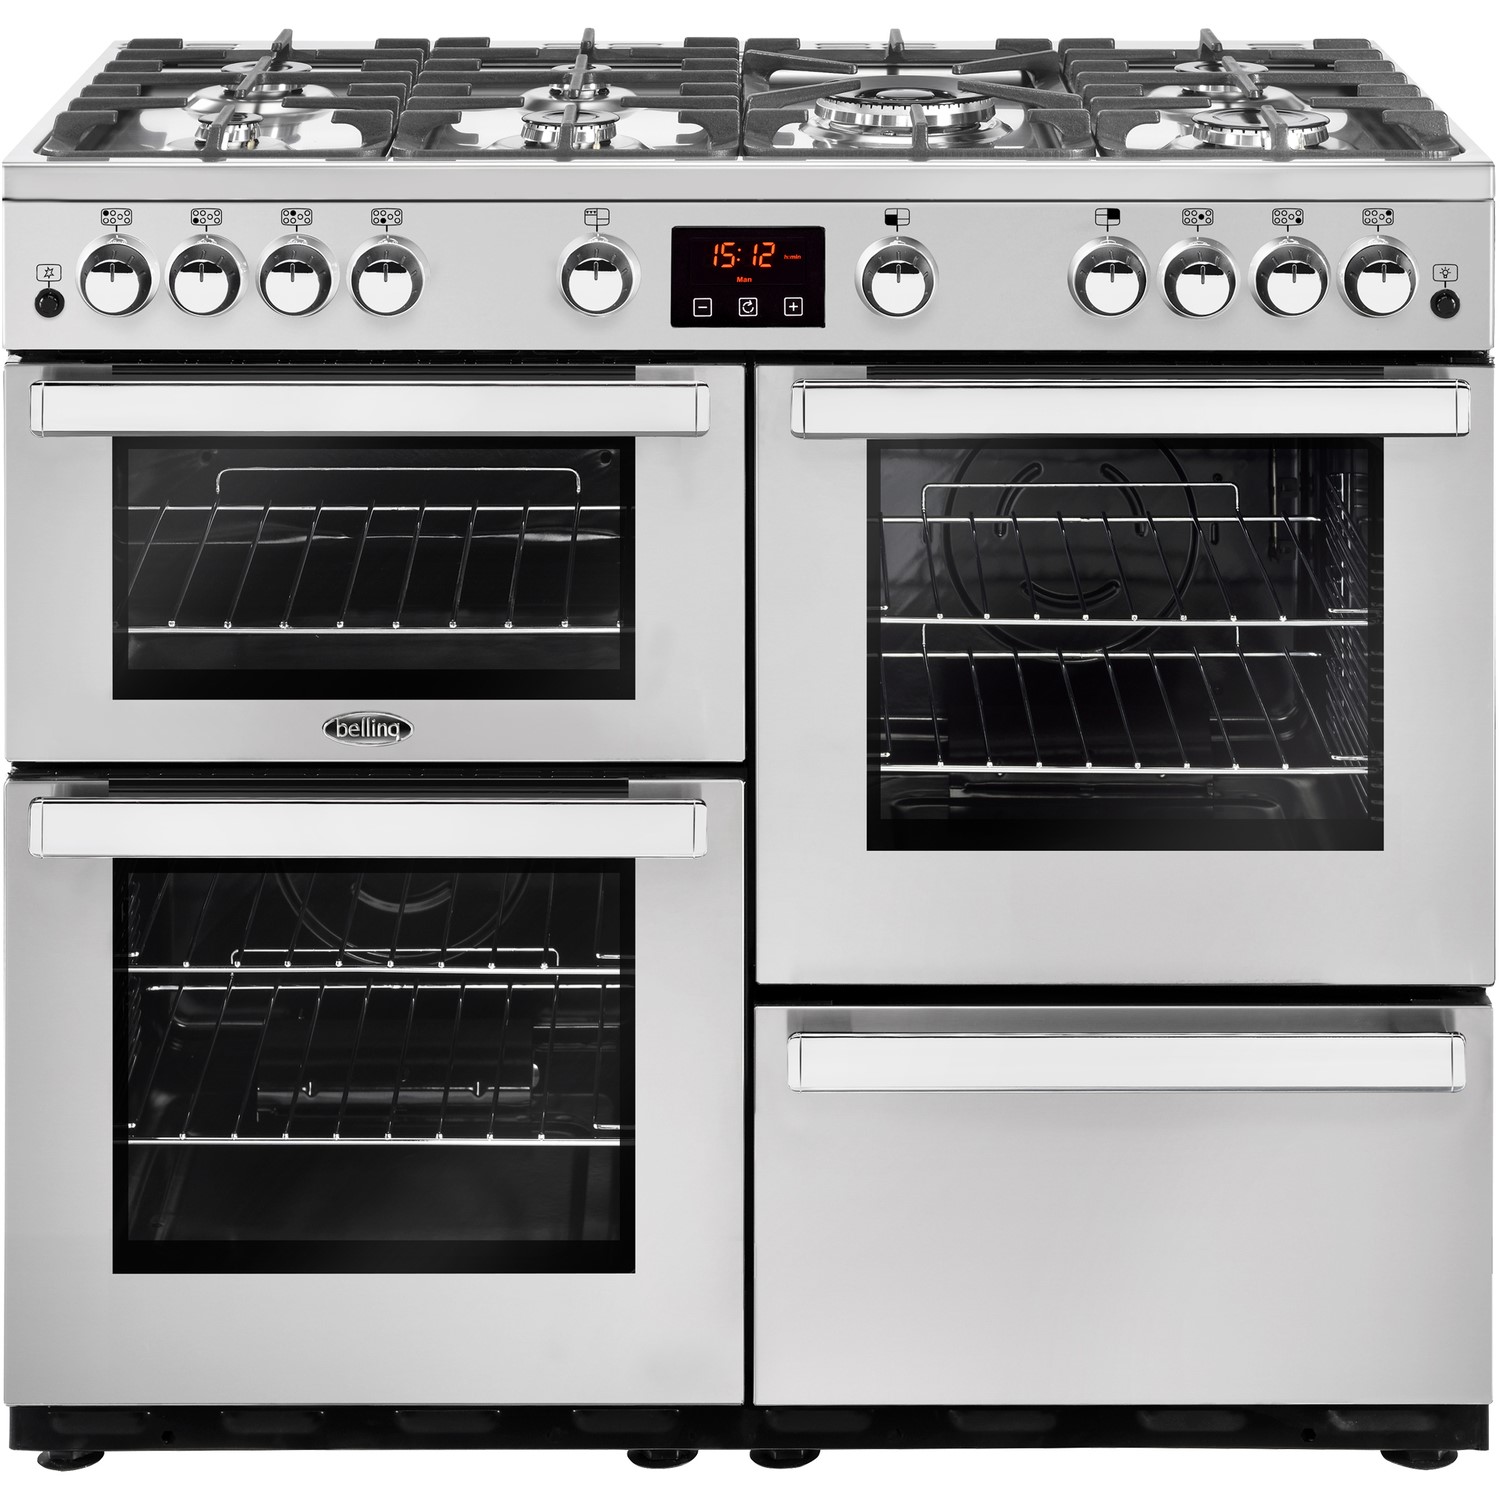 Refurbished Belling Cookcentre 100G Professional 100cm Gas Range Cooker Stainless Steel